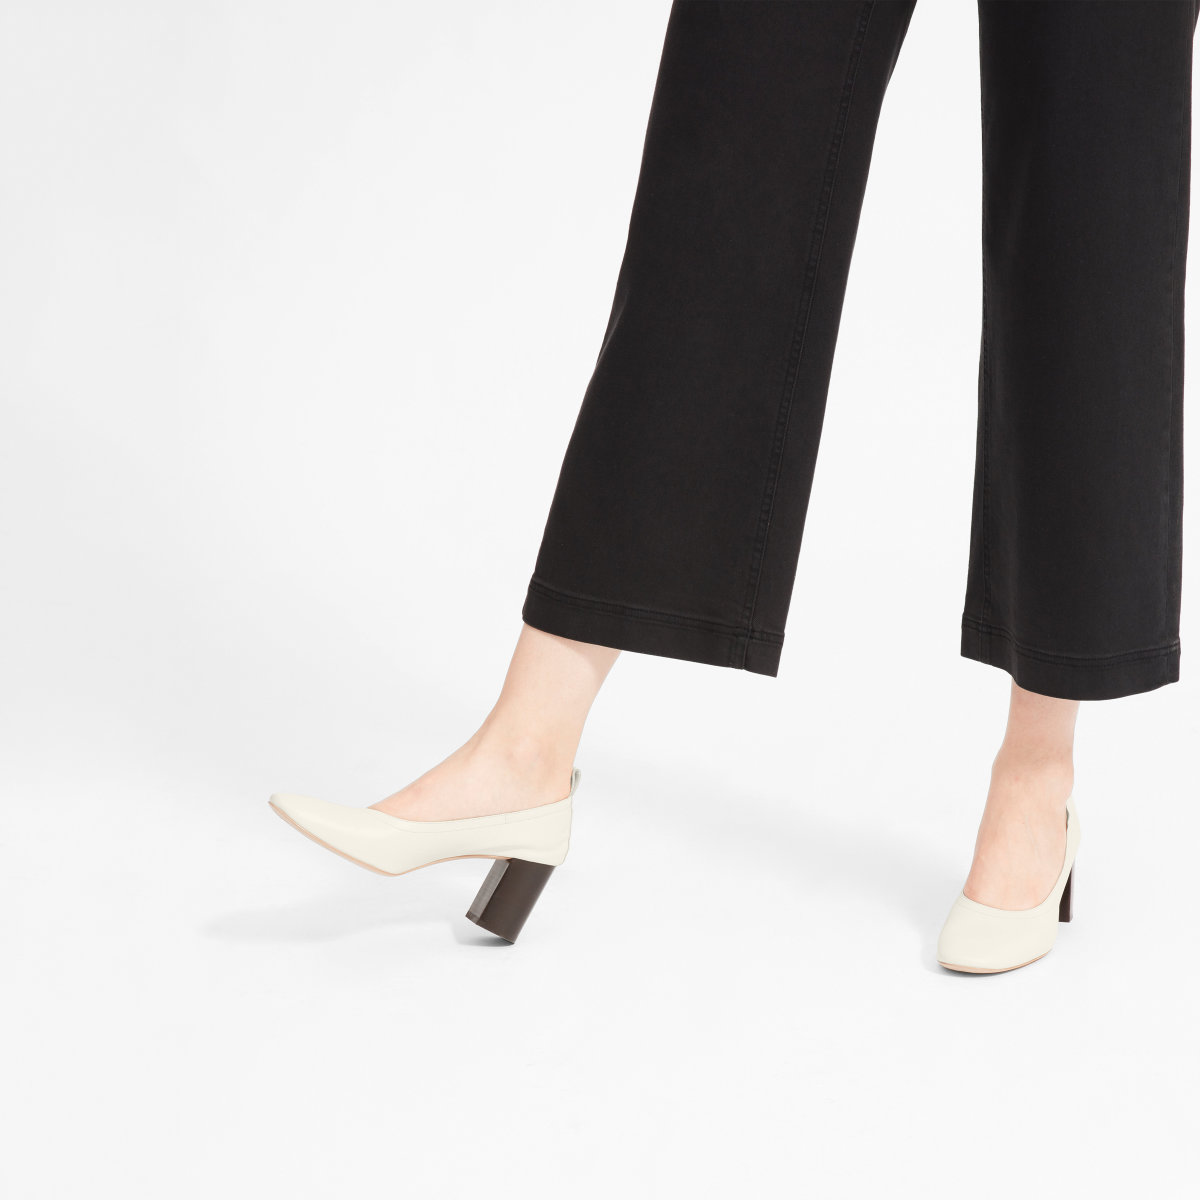 The Day High Heel by Everlane in White